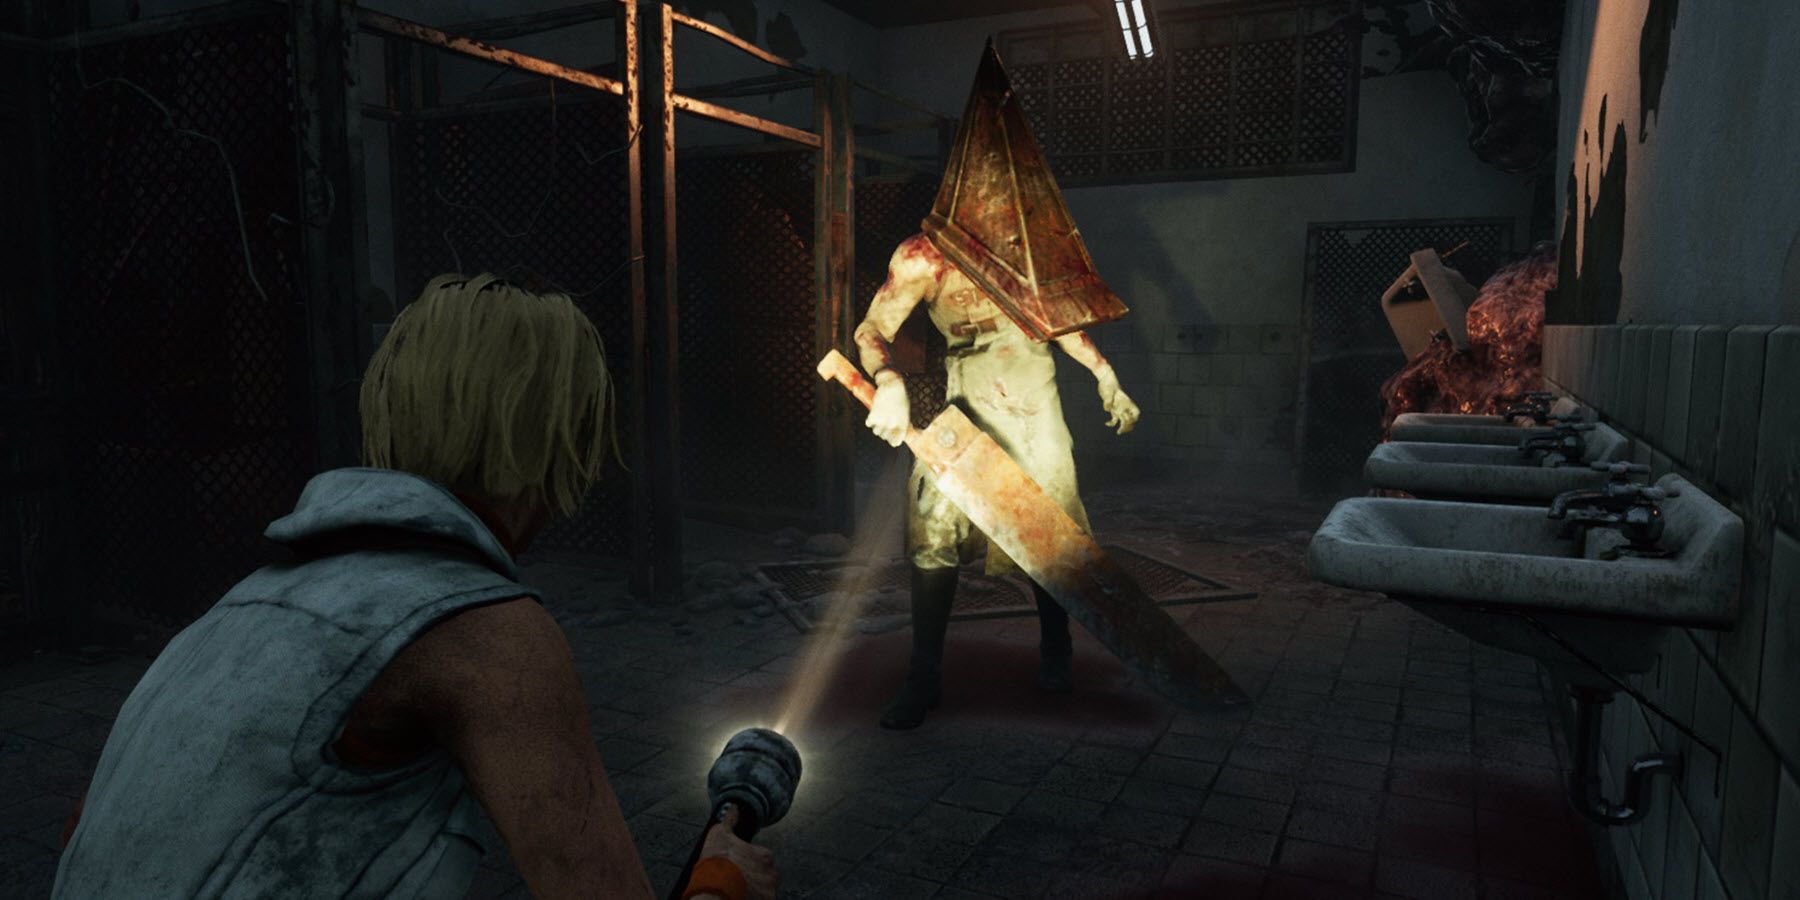 Silent Hill 2's Pyramid Head Gets New Pop Up Parade Figure